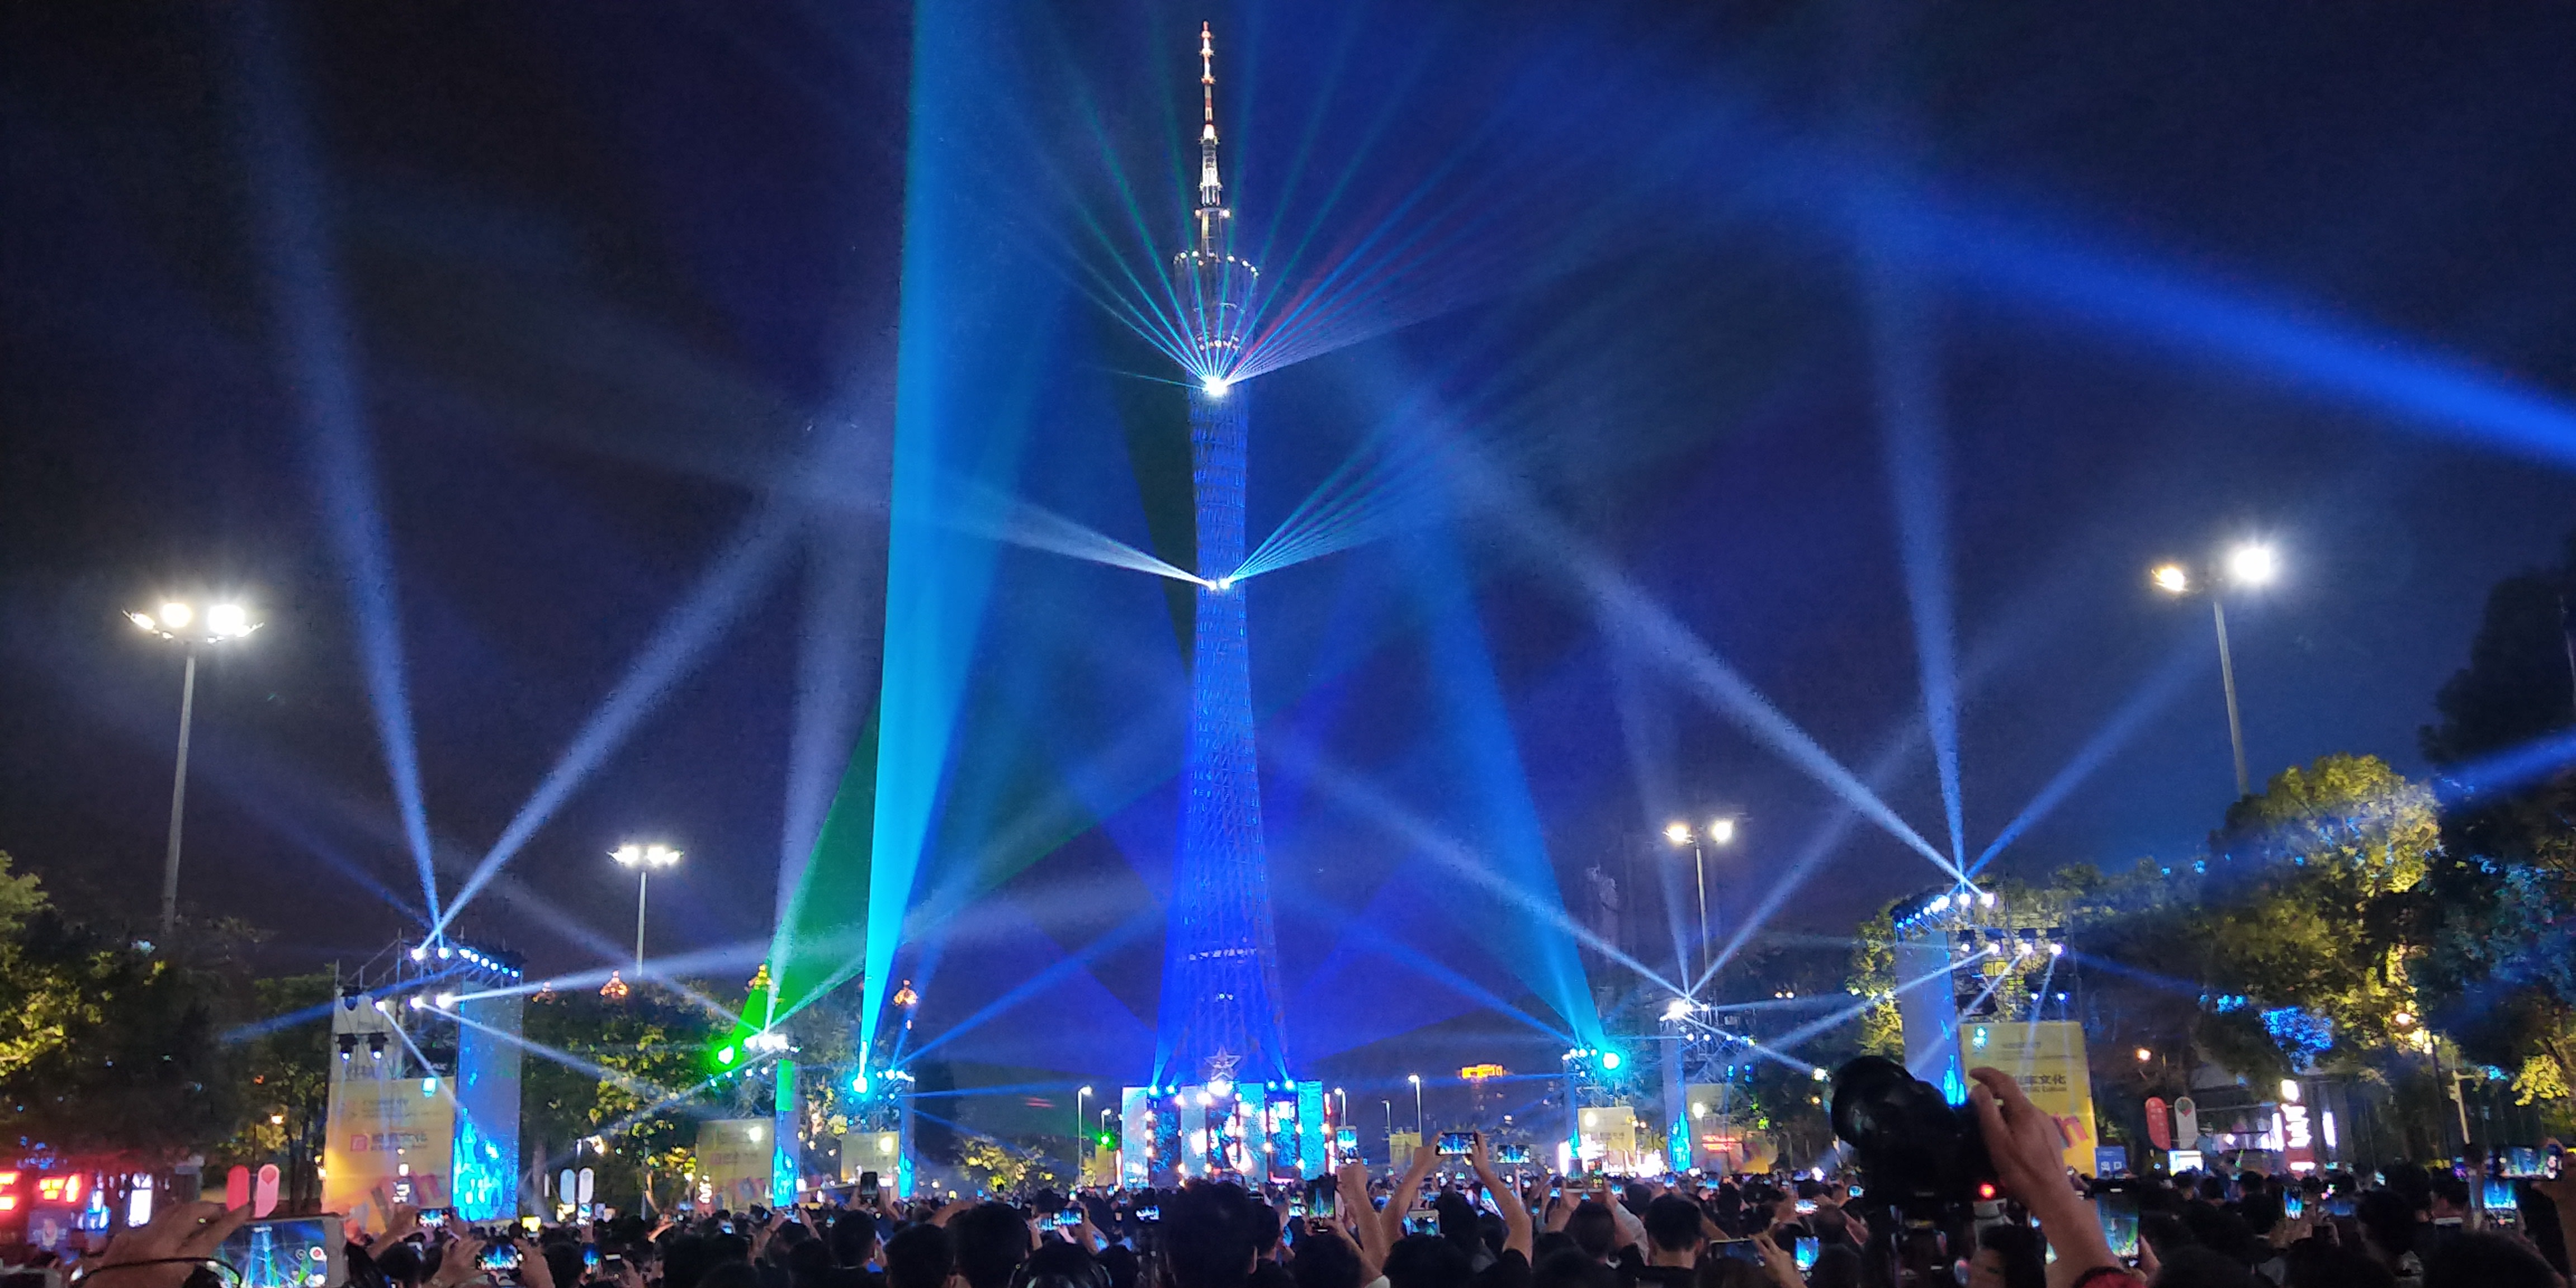 See the Canton Tower Light Show That Attracts Numerous Travellers